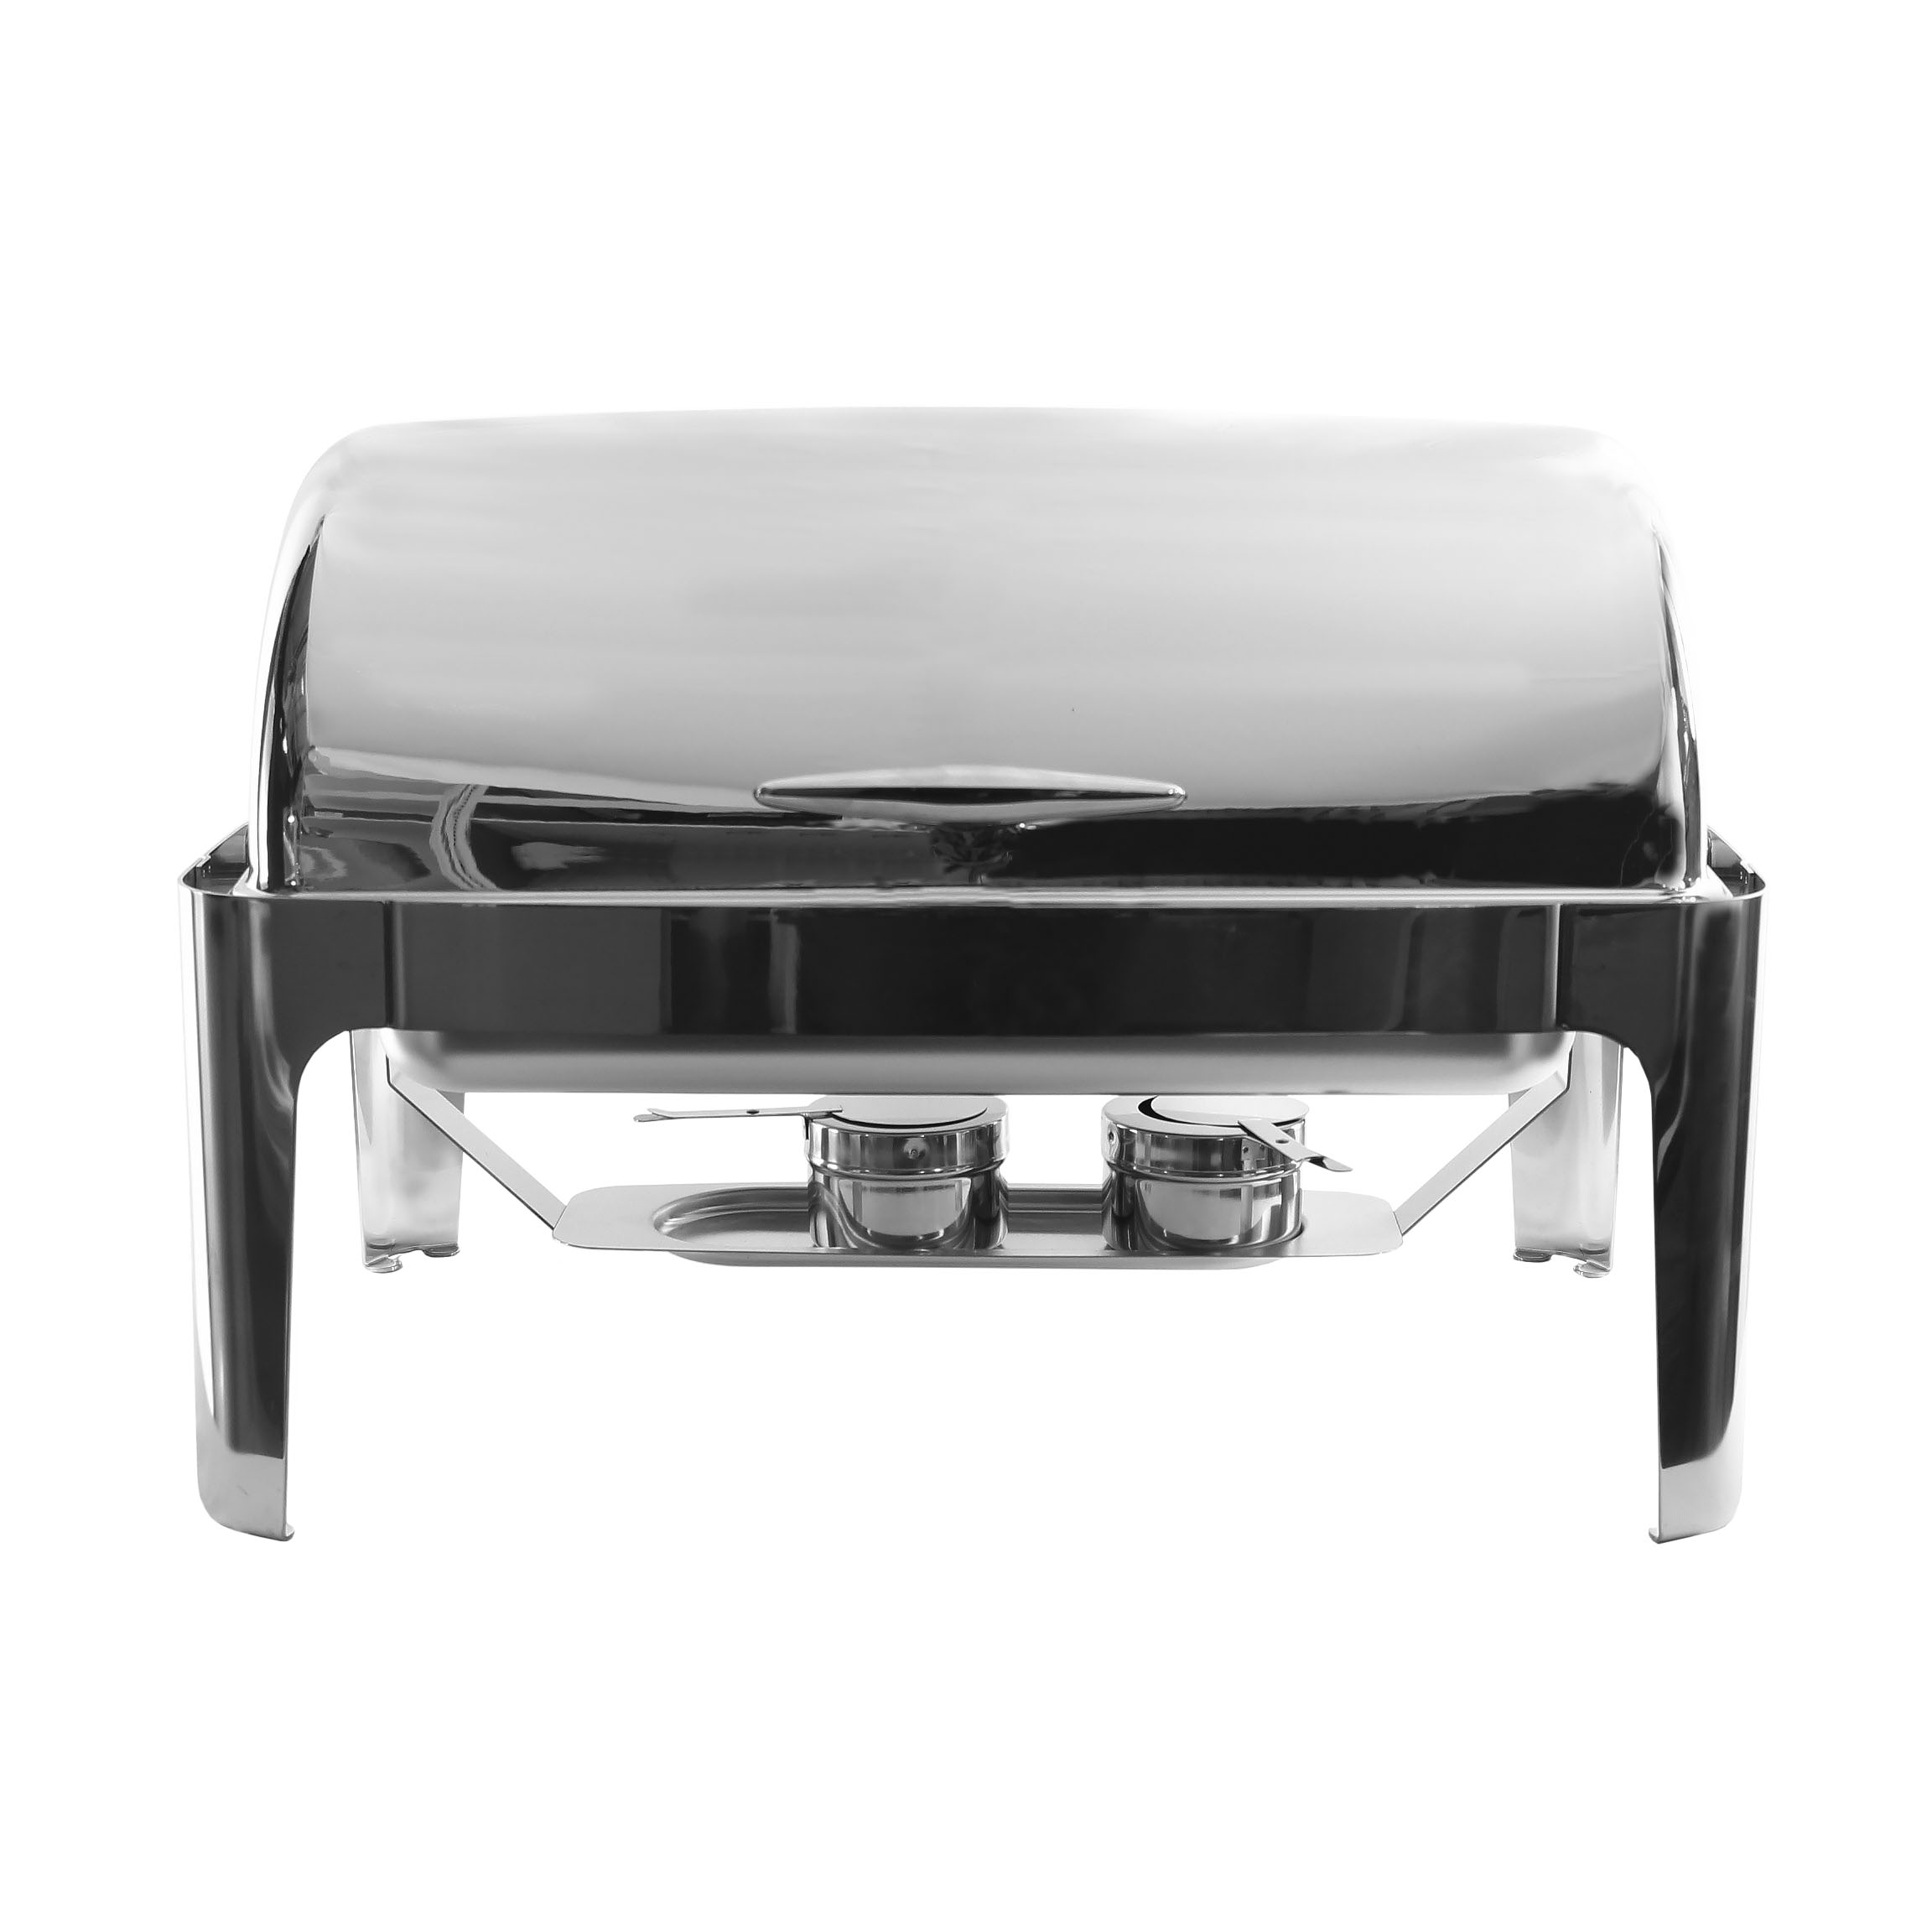 Chafer 8qt Roll Top Stainless